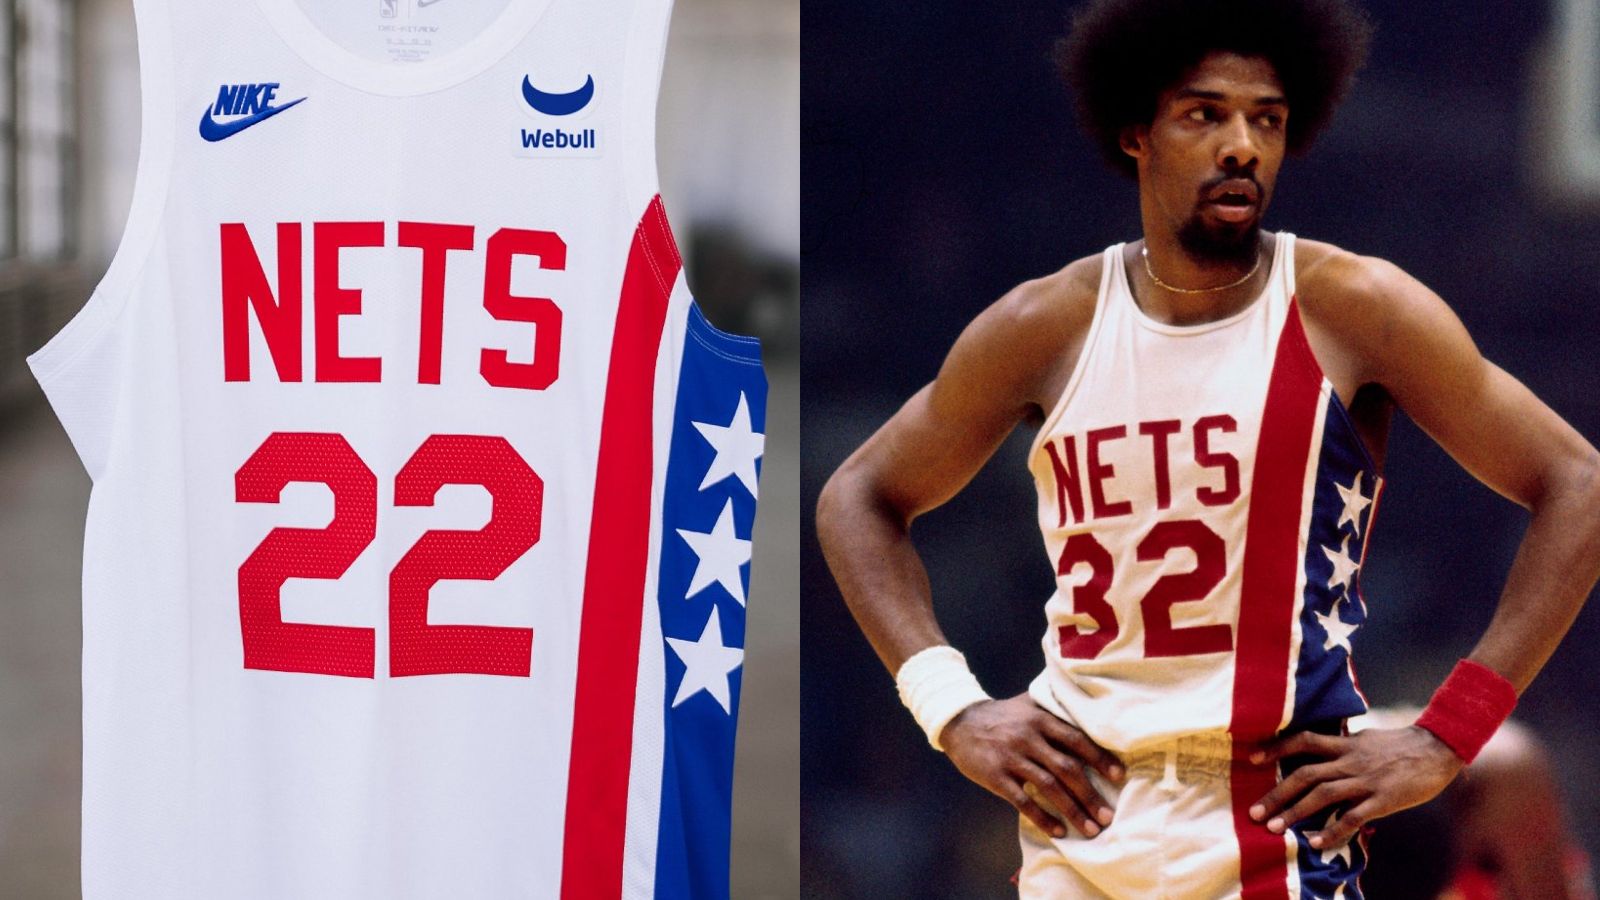 new jersey nets throwback jersey